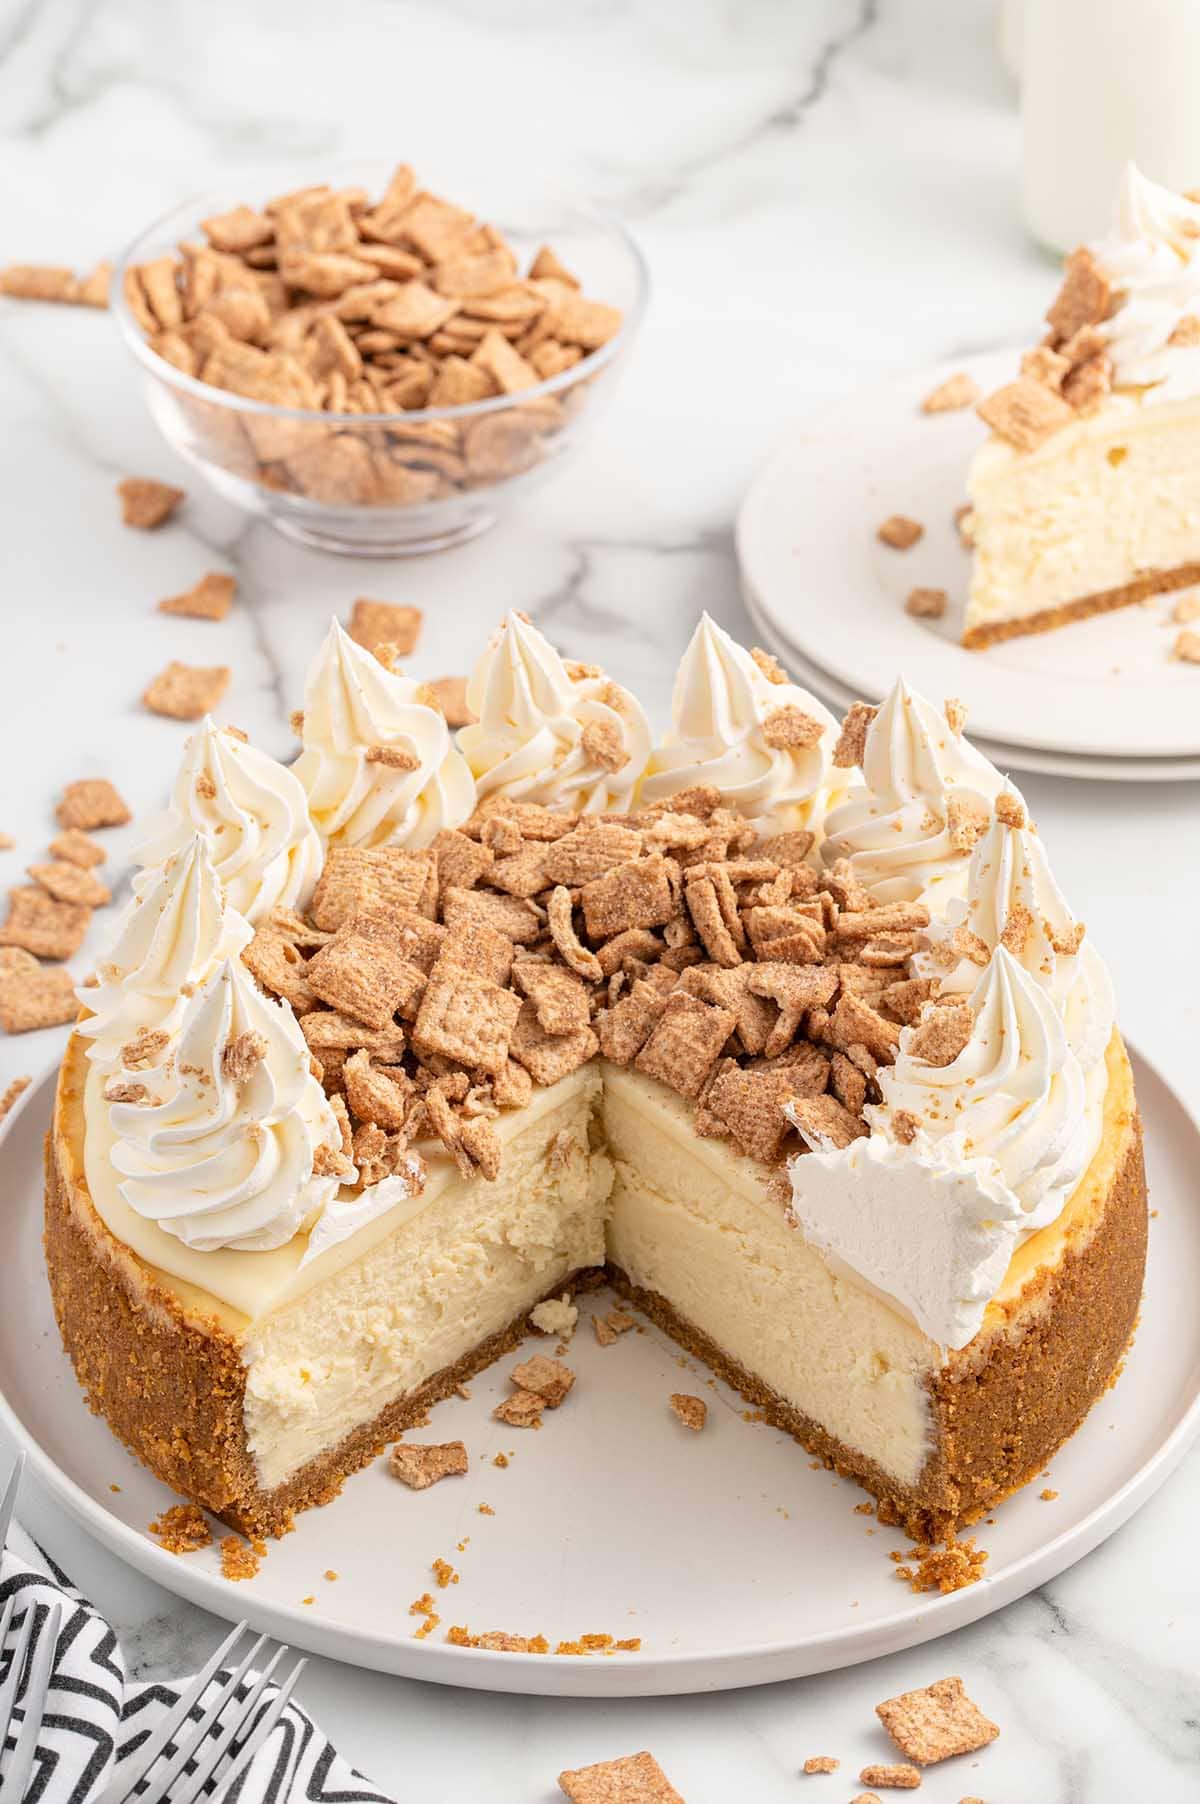 cinnamon toast crunch cheesecake on a plate with a slice of cheesecake on another plate.